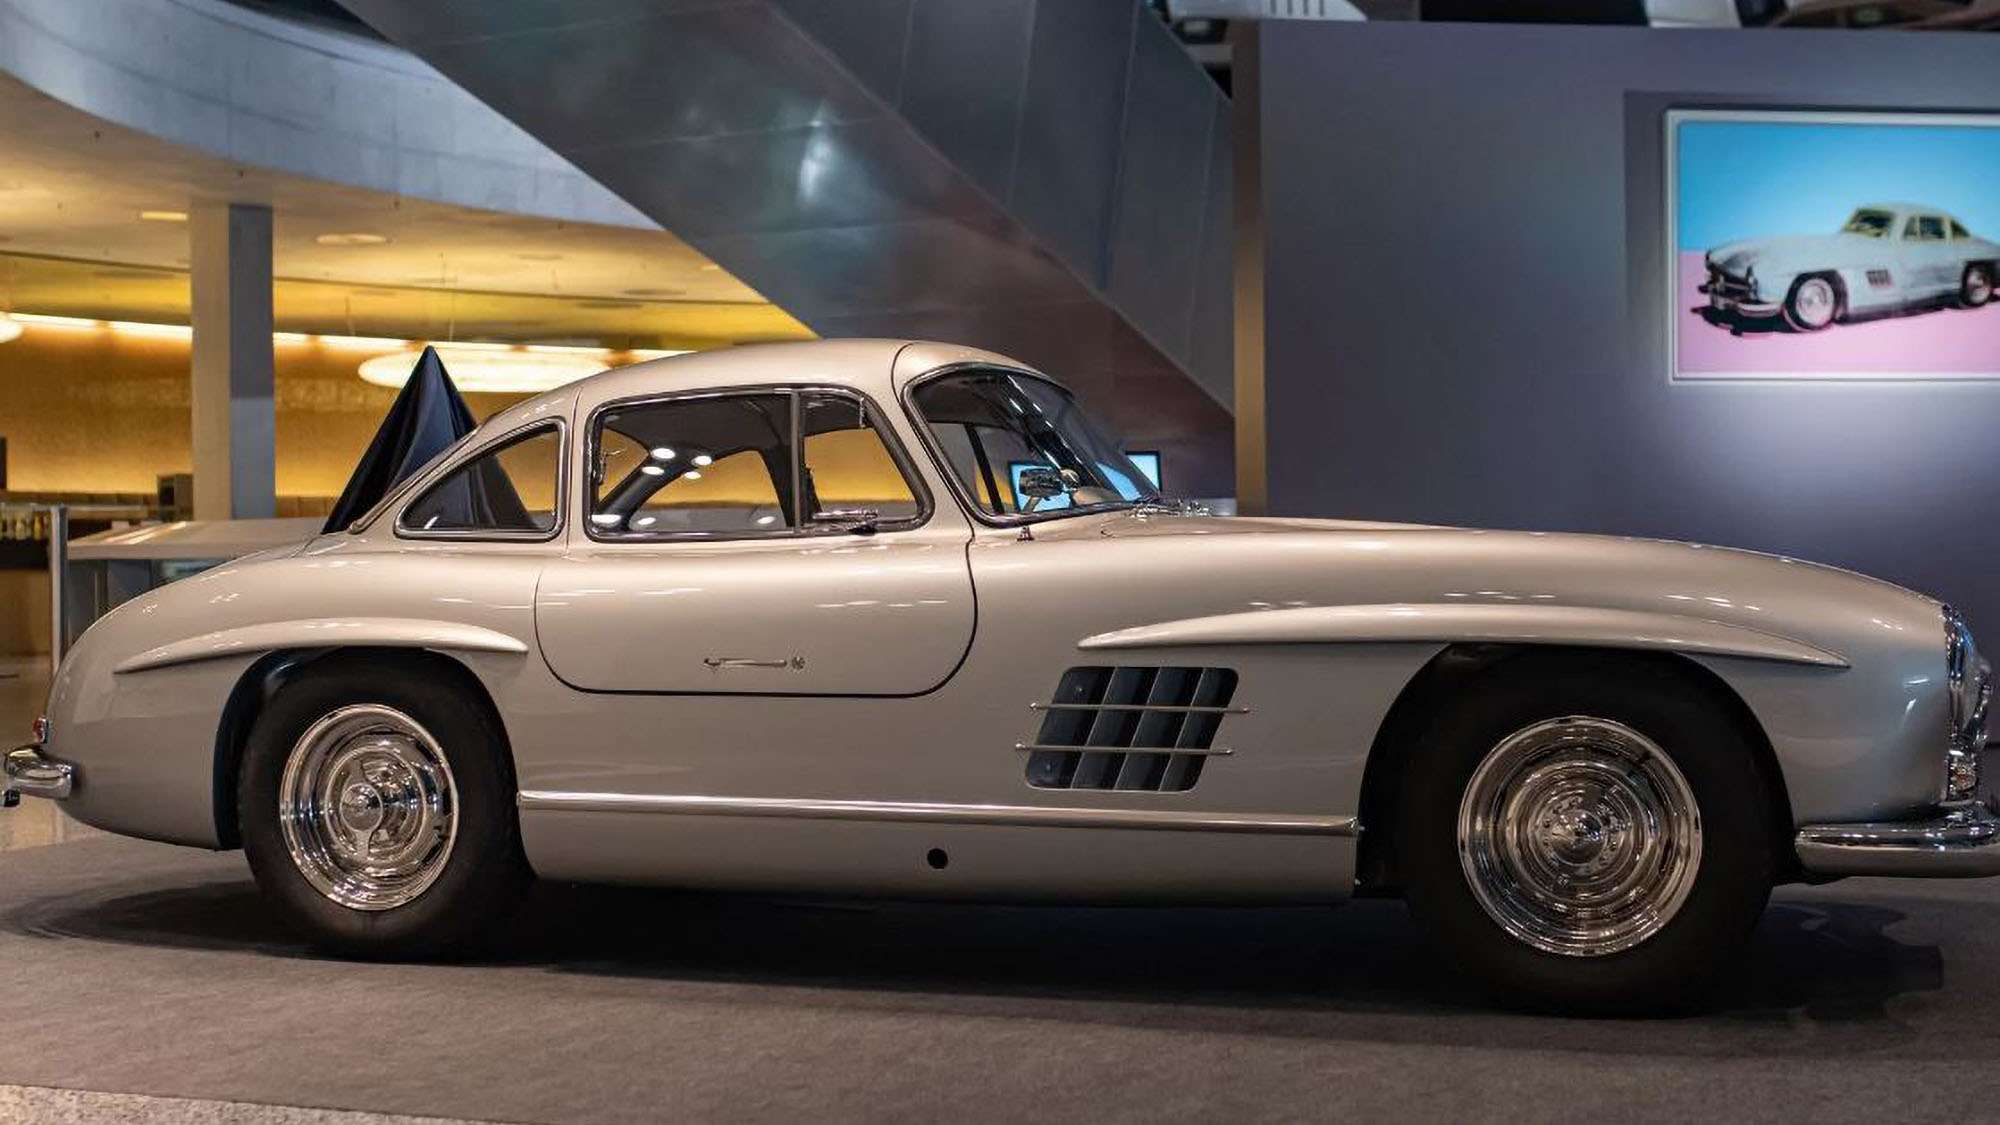 Read more about the article Original Mercedes-Benz 300 SL Painted By Andy War Going Under The Hammer In New York